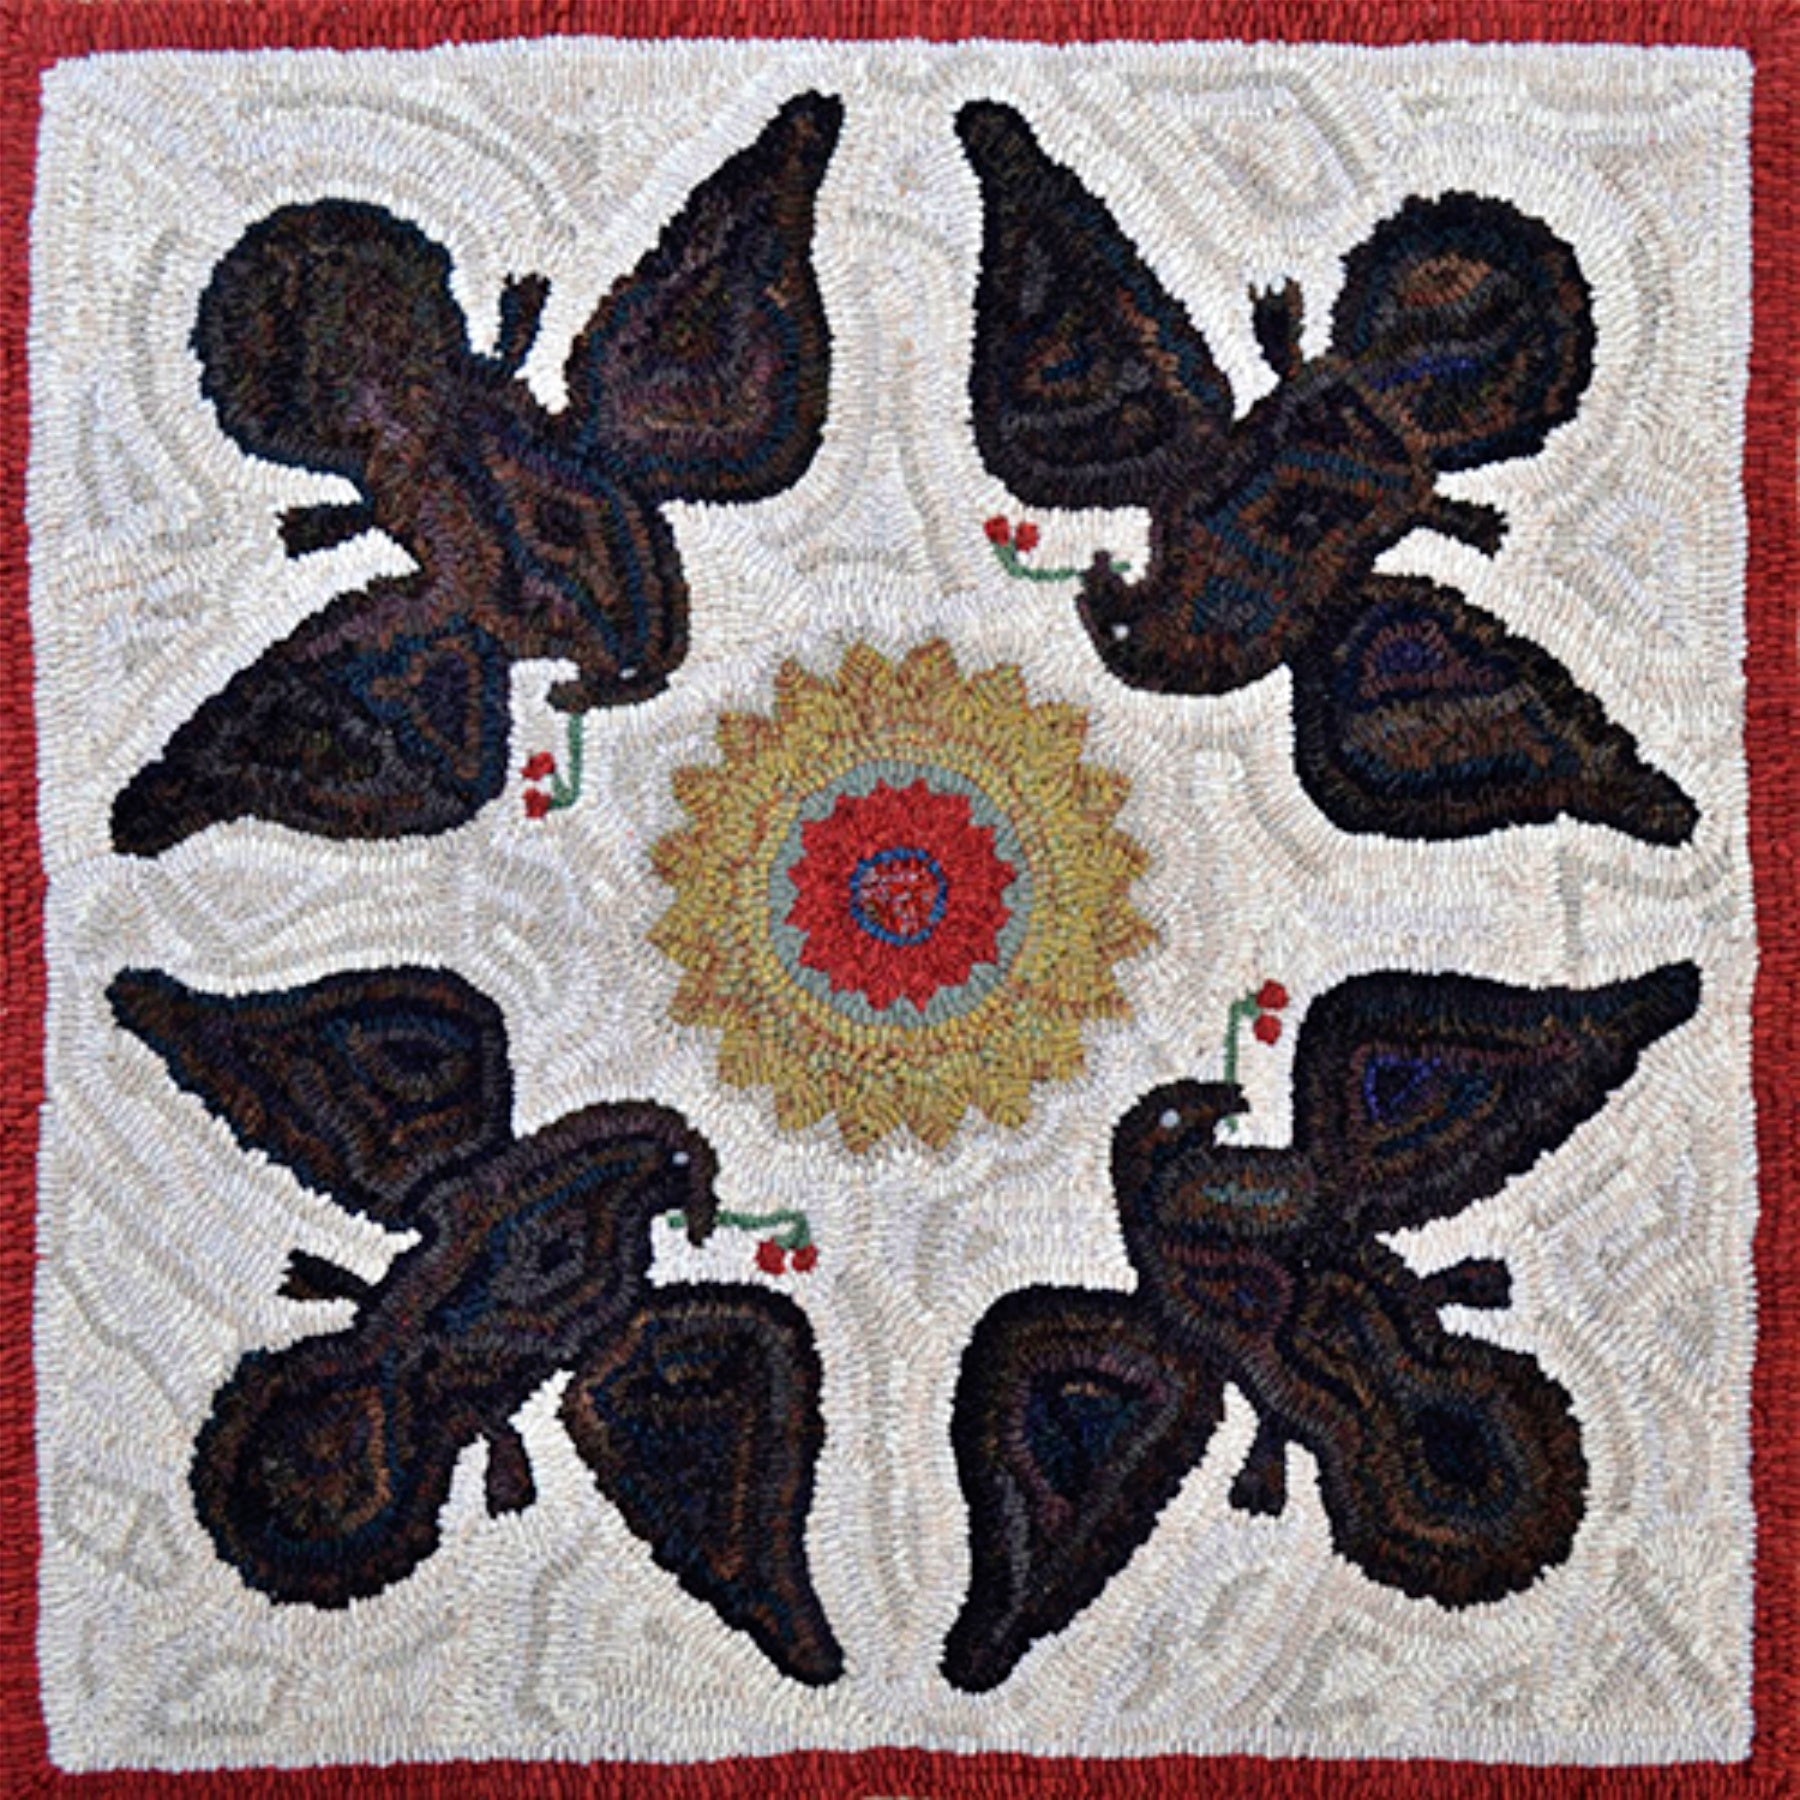 Four Eagles, rug hooked by Christa Bowling